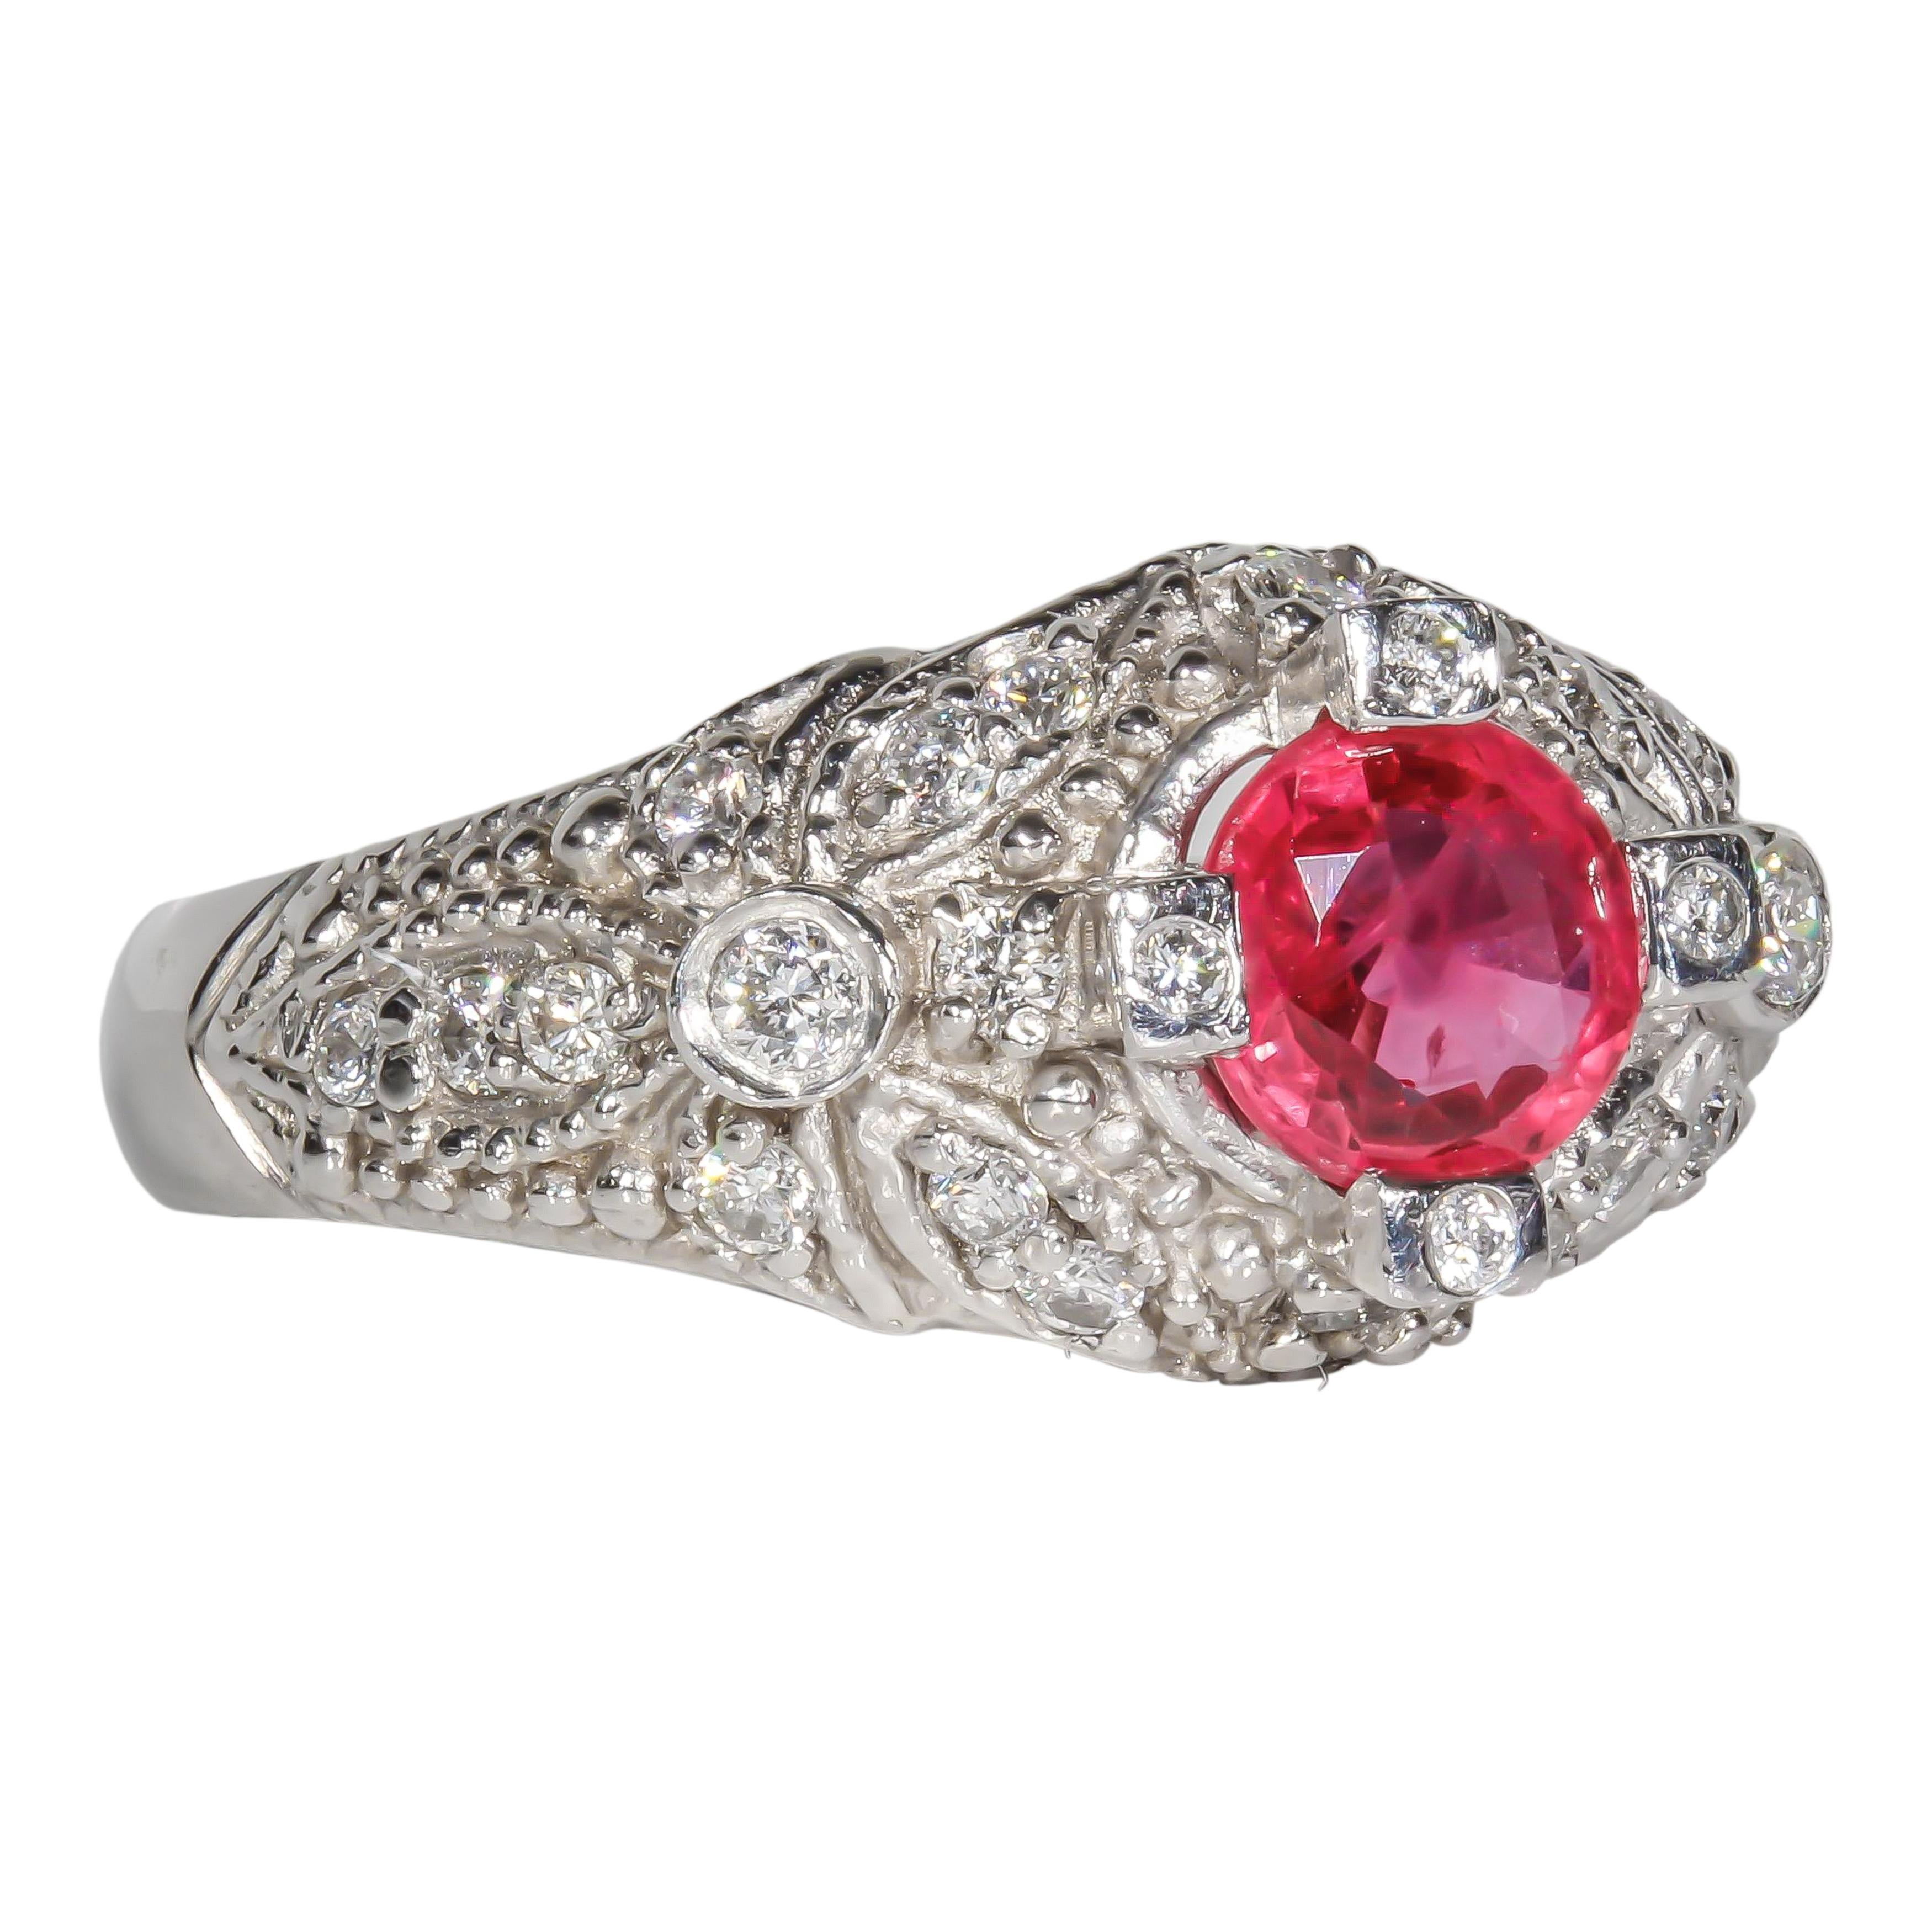 Platinum cocktail ring containing a 1.06 carat ruby center stone with round brilliant natural diamond side stones. The total weight of the 25 diamond side stones is 0.41 carats; additionally, the side stones have been graded internally as H-I color,